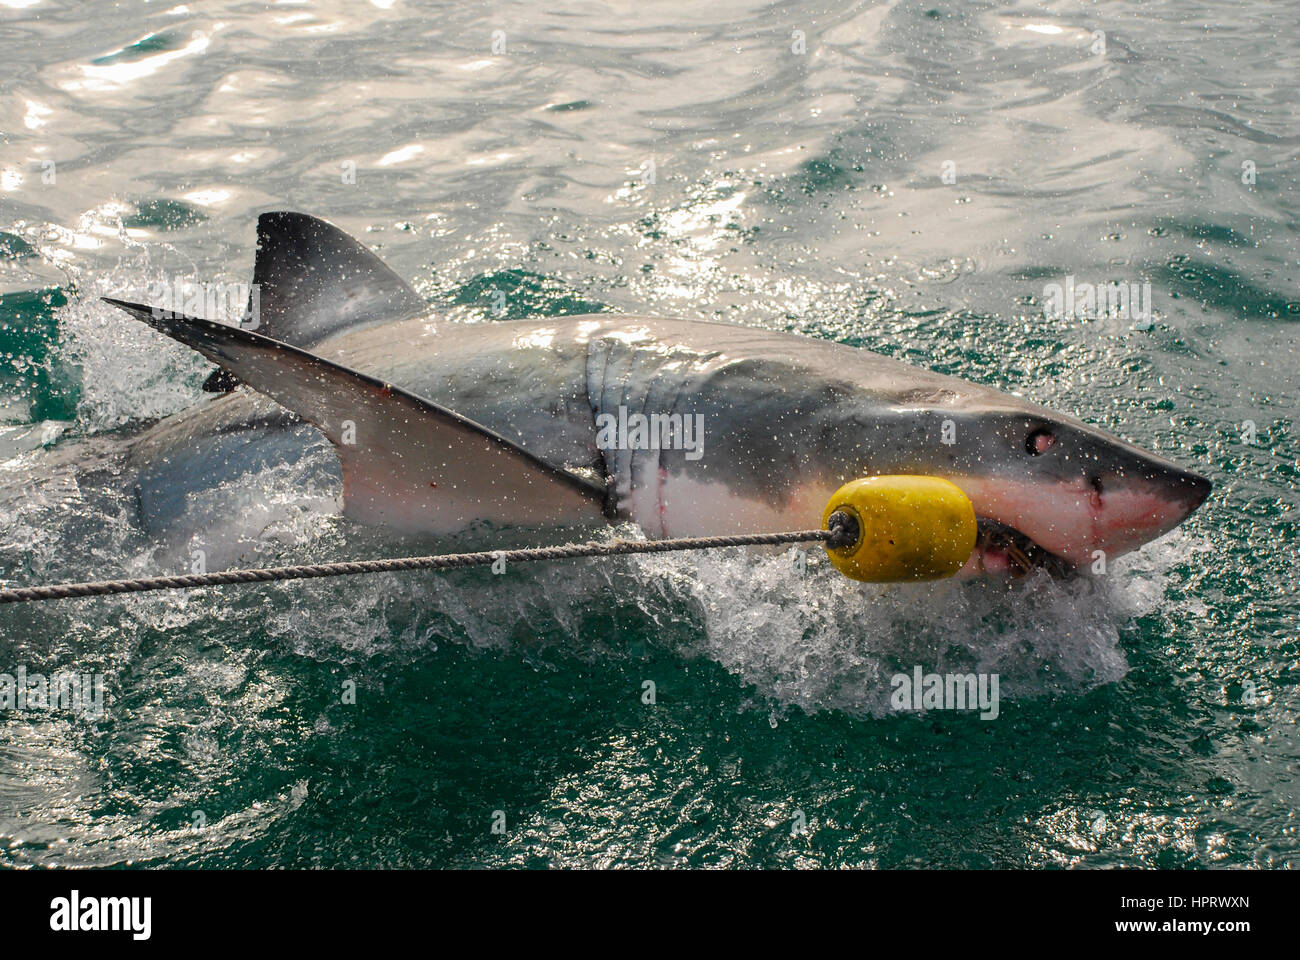 A great white shark bites into the bait from a cge diving boat in Gansbaai, South Africa Stock Photo